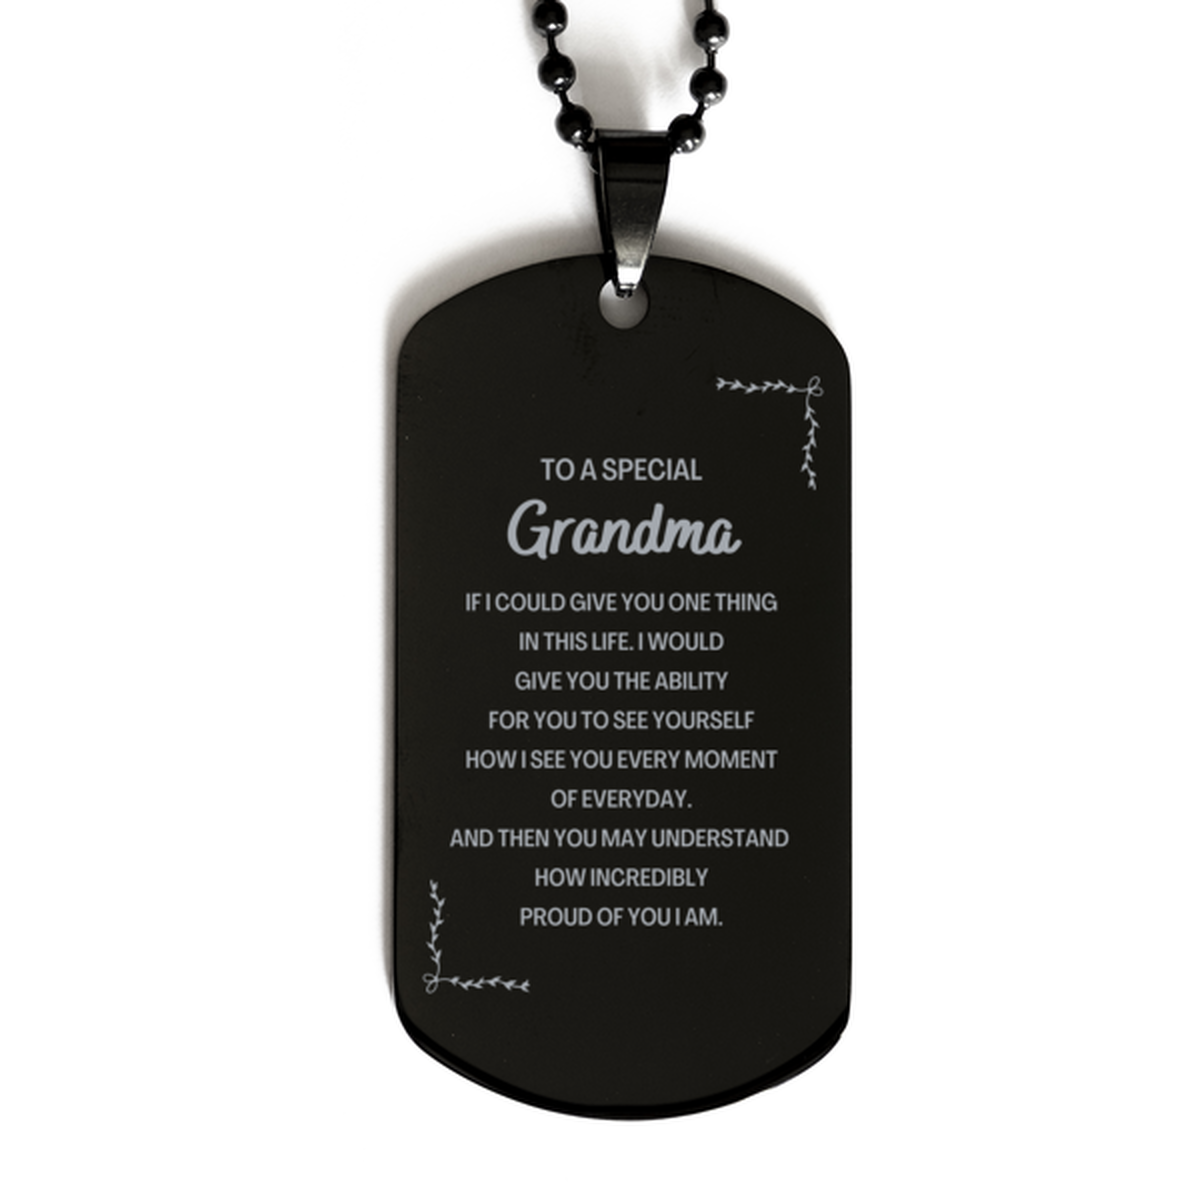 To My Grandma Black Dog Tag, Gifts For Grandma Engraved, Inspirational Gifts for Christmas Birthday, Epic Gifts for Grandma To A Special Grandma how incredibly proud of you I am